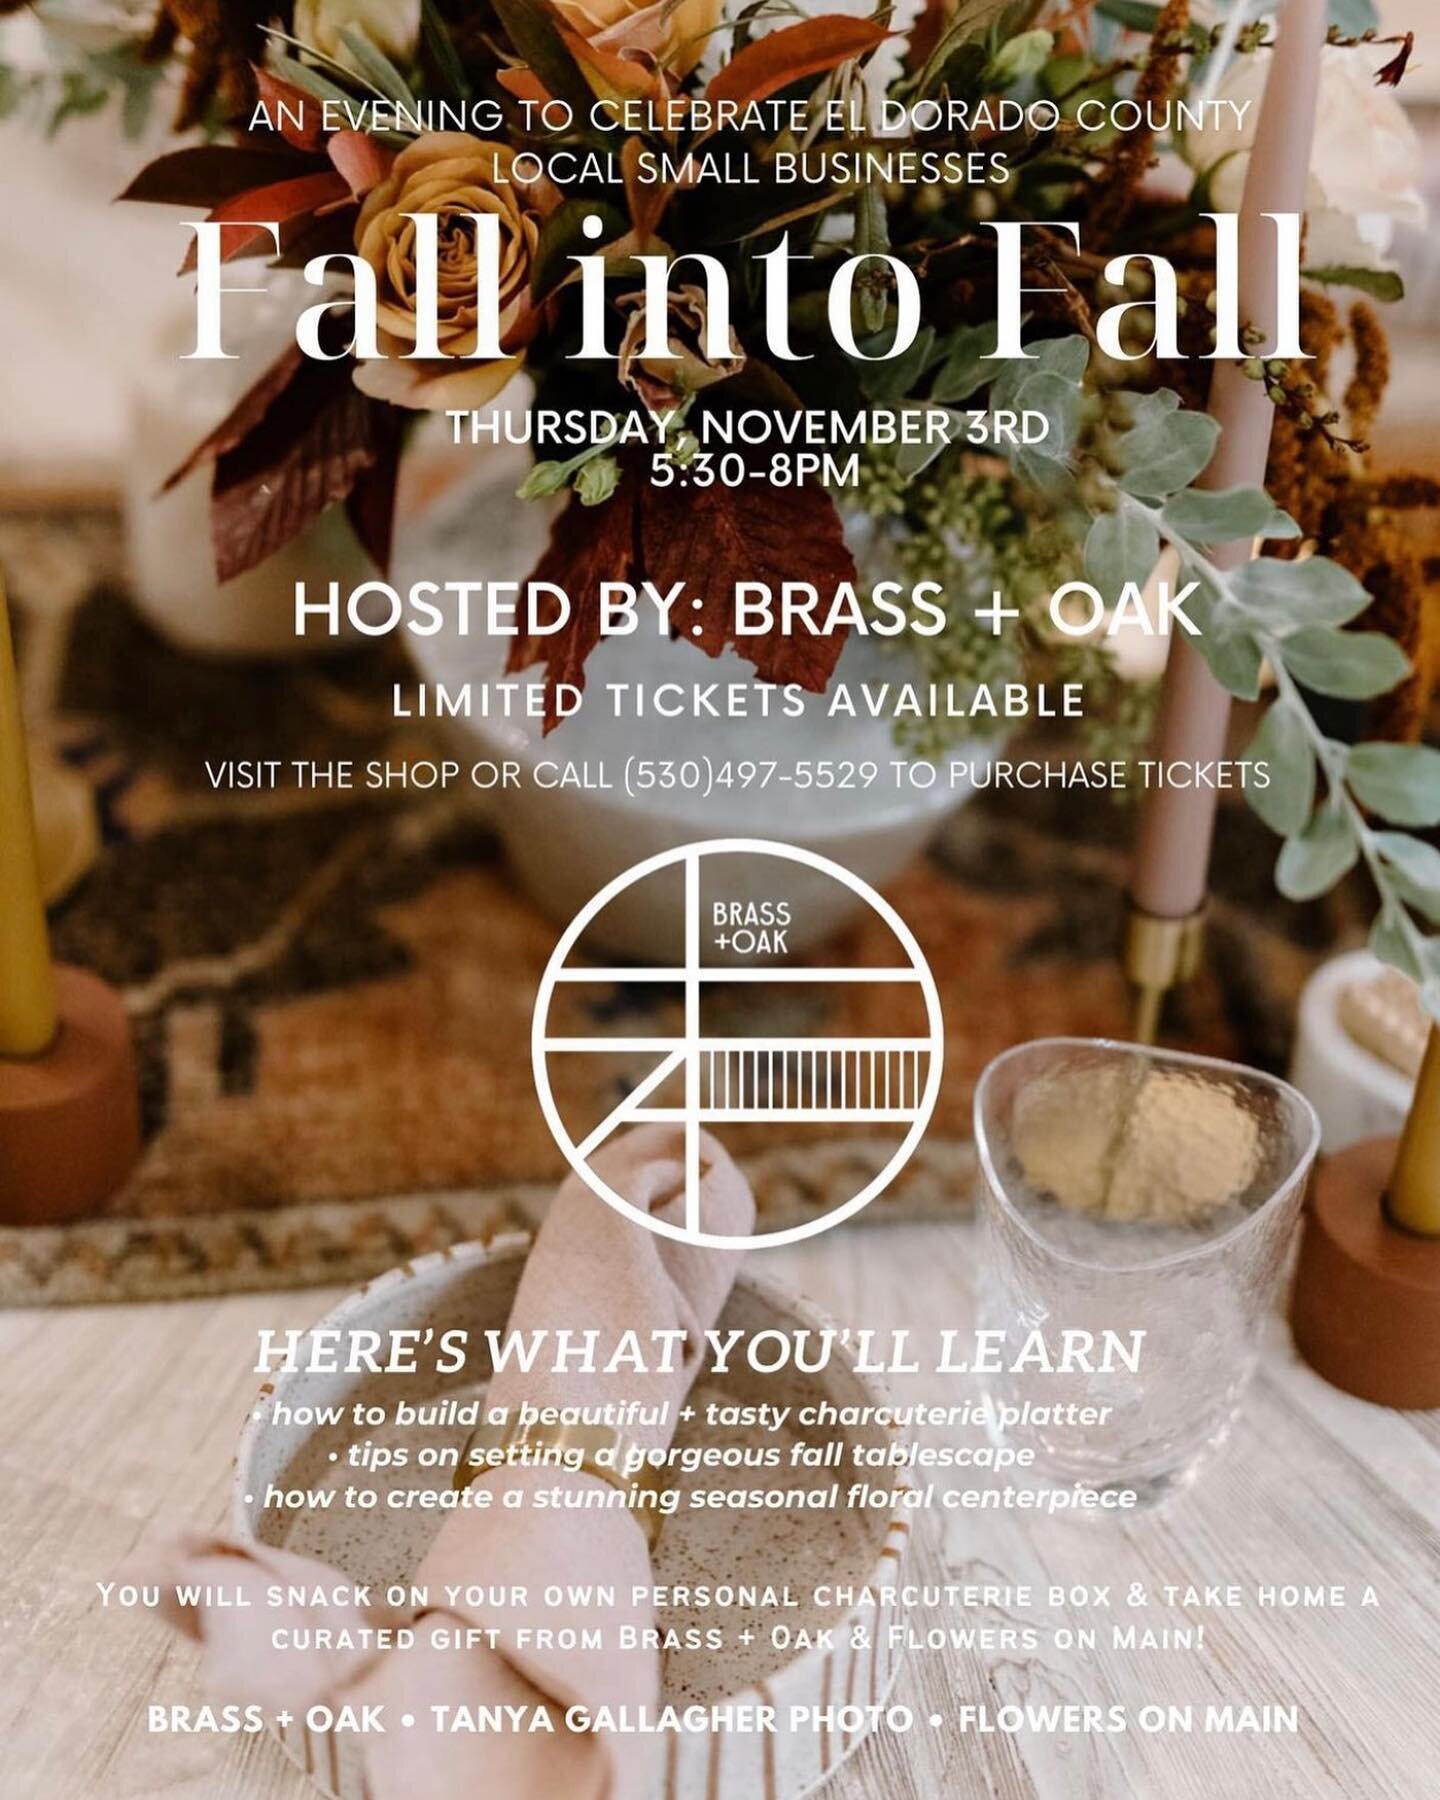 Join us Thursday November 3rd for our FALL into FALL event. Enjoy an evening to celebrate El dorado County local small business 🍂

Tickets are limited- call you reserve yours ✨530-497-5529 ✨ 
.
#visiteldorado #visitplacerville #visiteldoradowineries